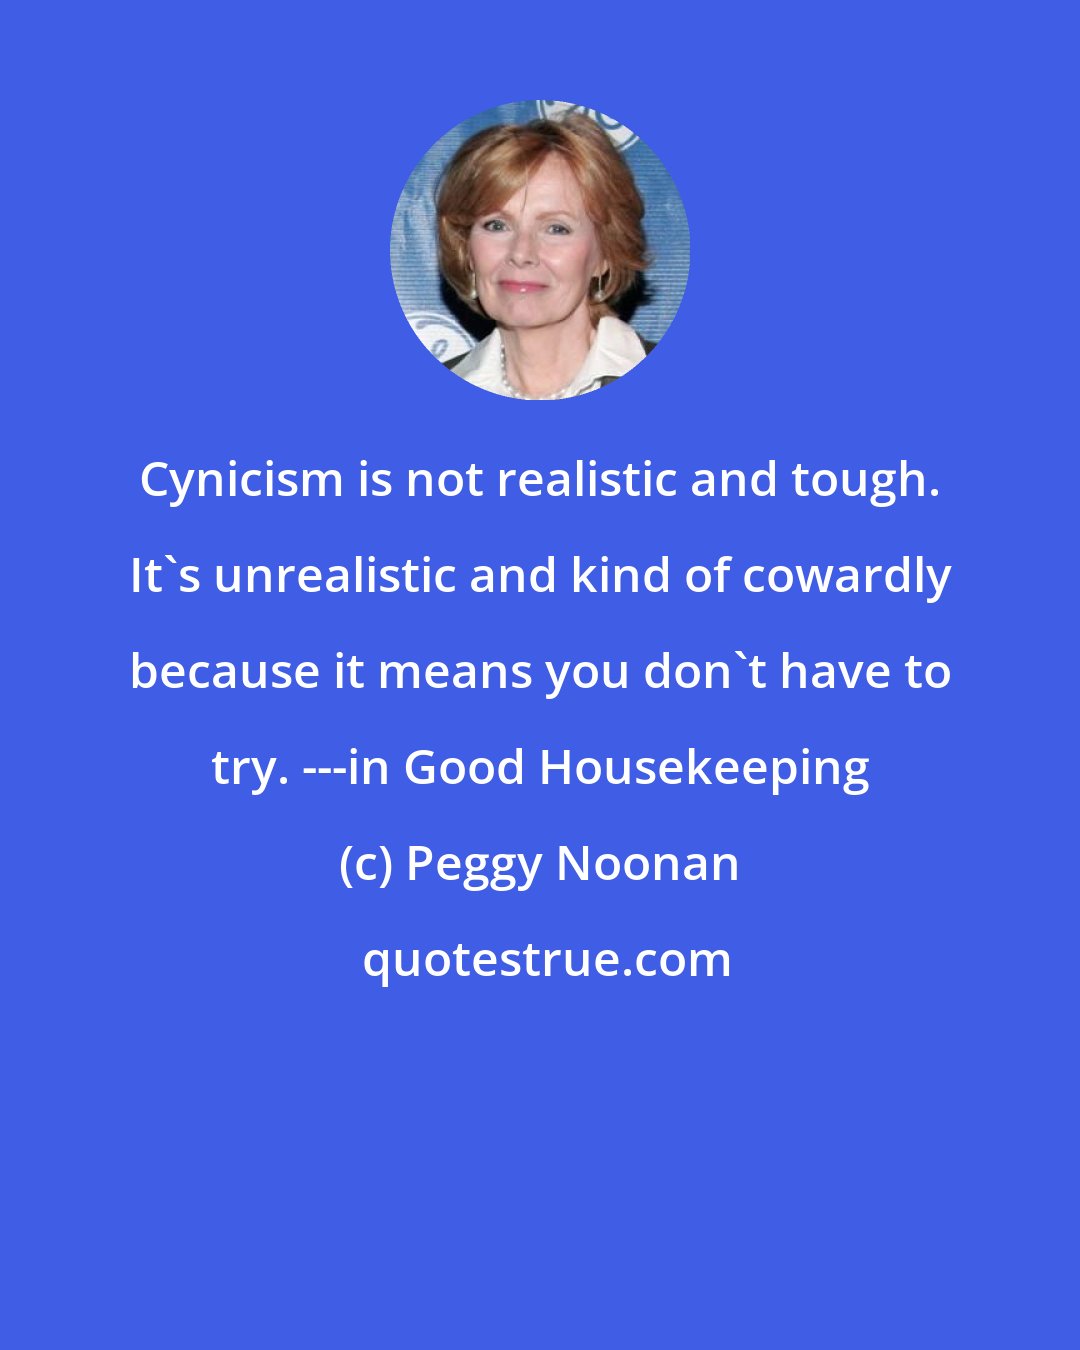 Peggy Noonan: Cynicism is not realistic and tough. It's unrealistic and kind of cowardly because it means you don't have to try. ---in Good Housekeeping